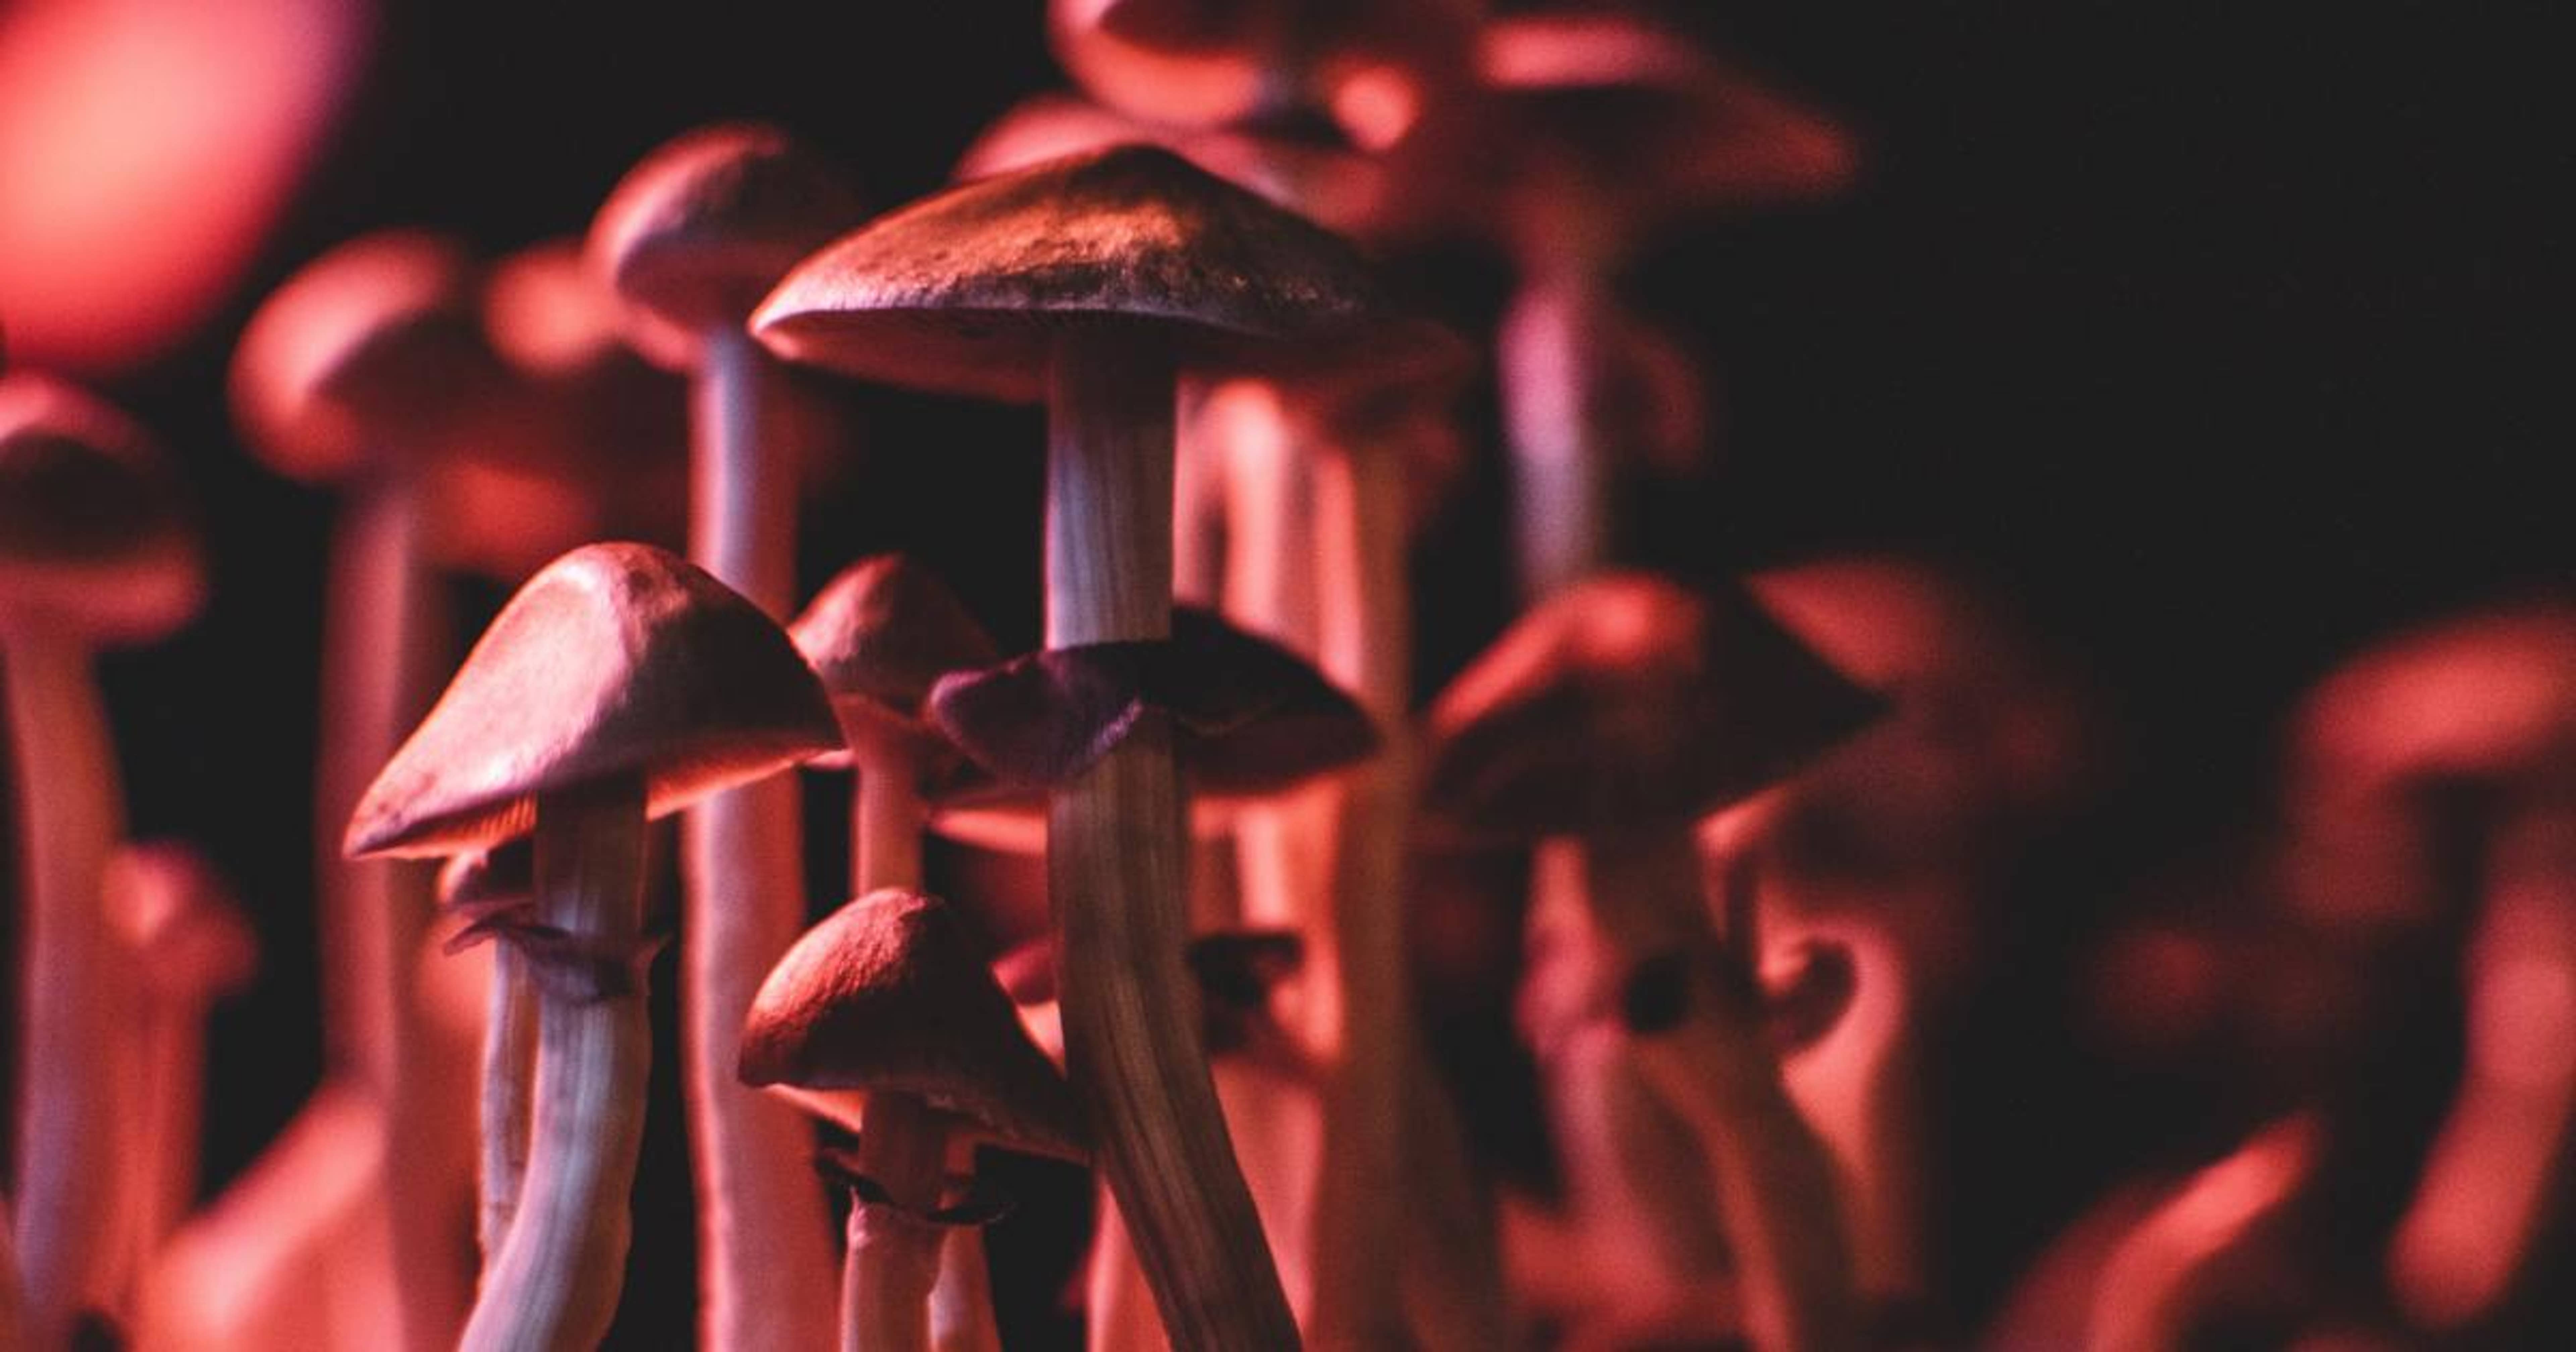 Connecticut Gov. Lamont Signs Budget Bill Including MDMA And Magic Mushrooms Provisions